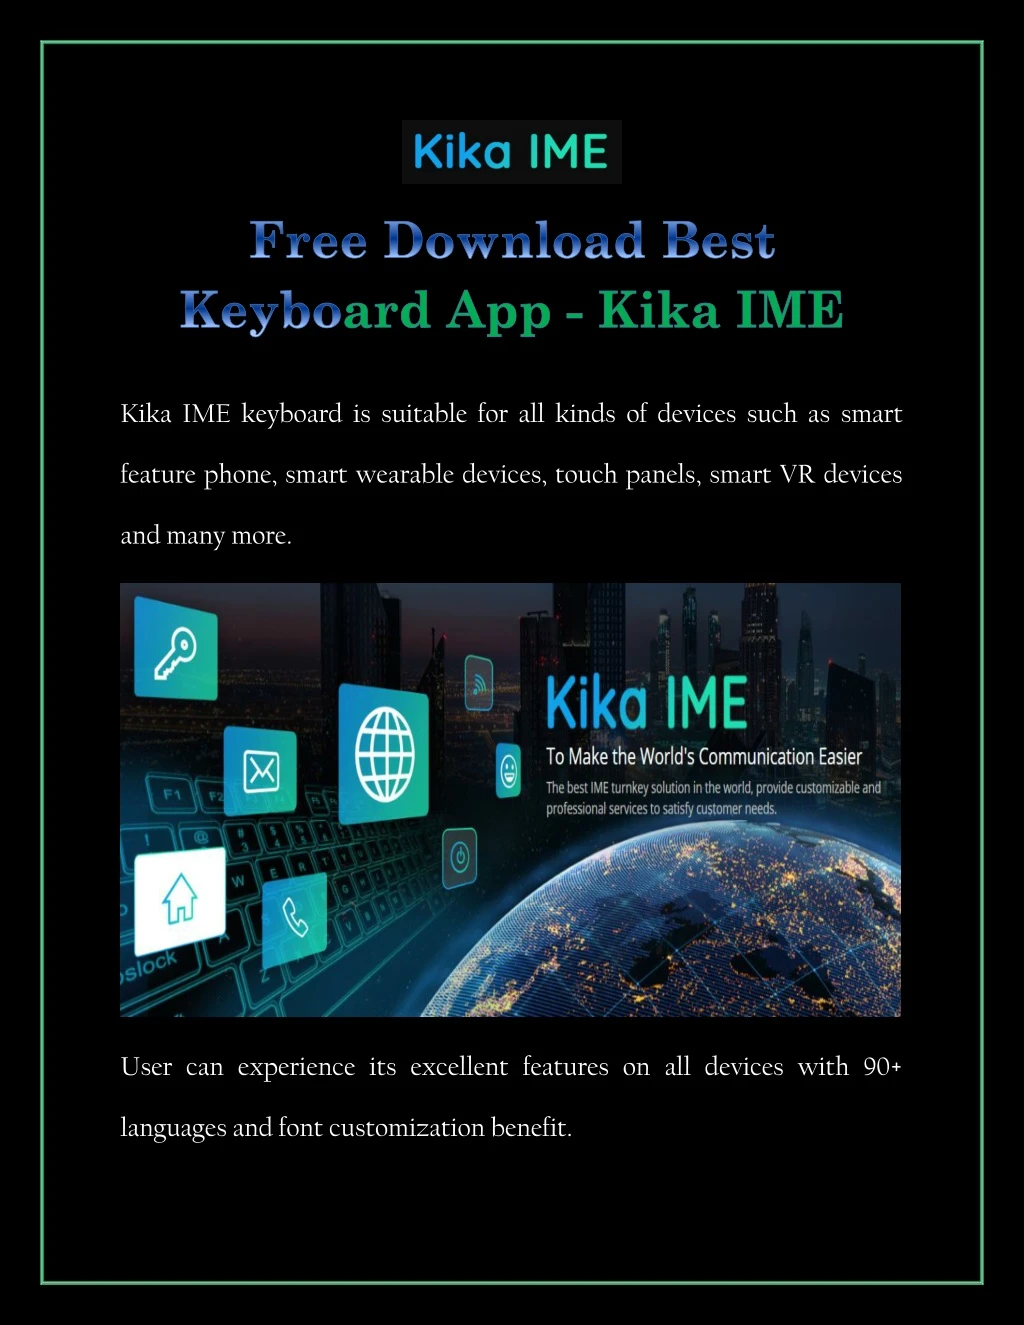 kika ime keyboard is suitable for all kinds